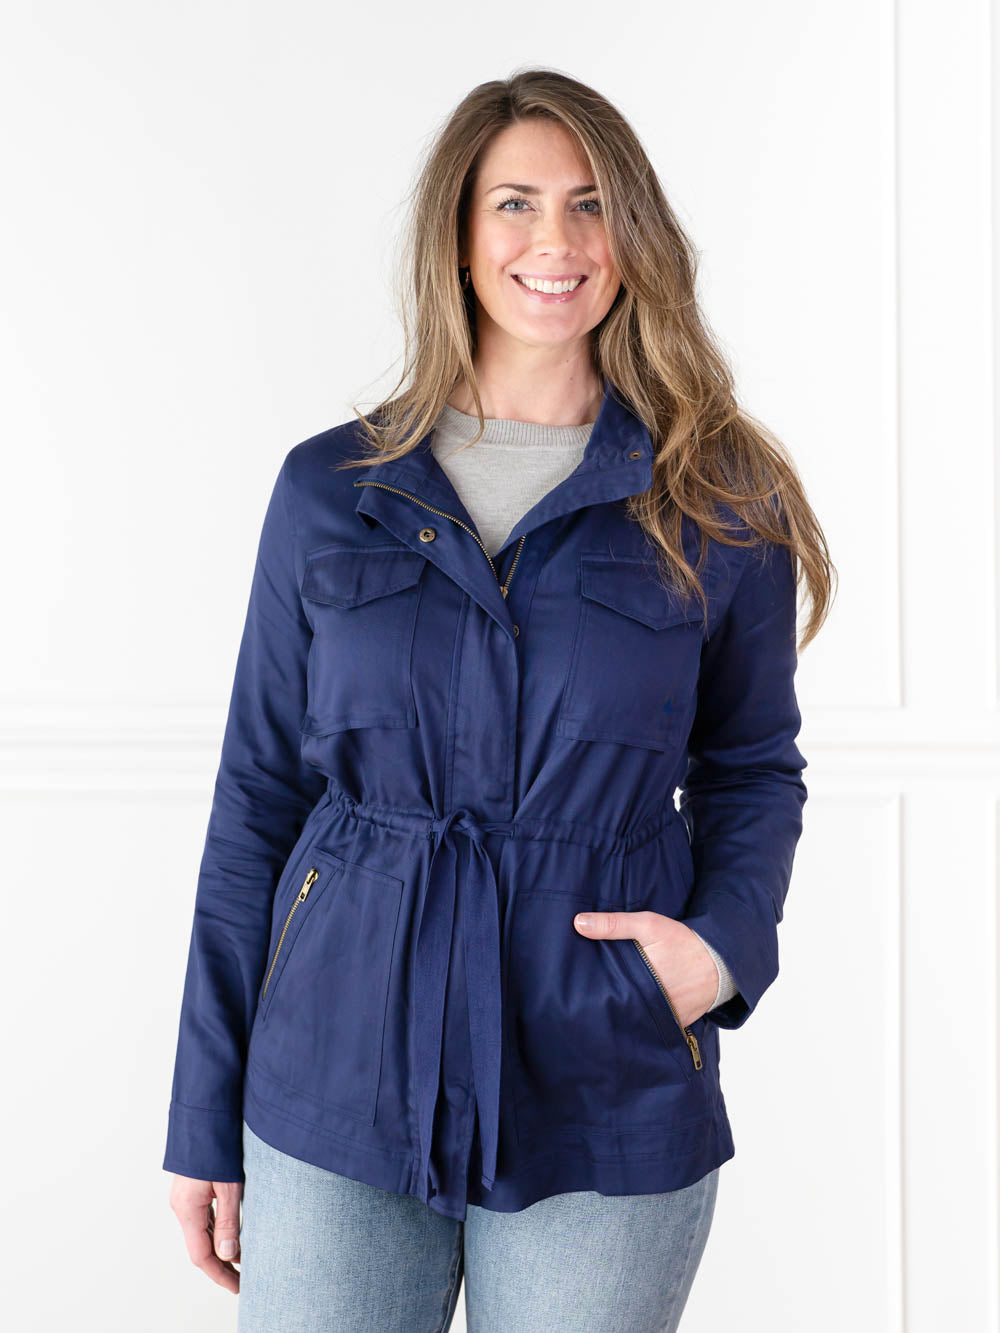 Utility Jacket and Outerwear for Tall Women